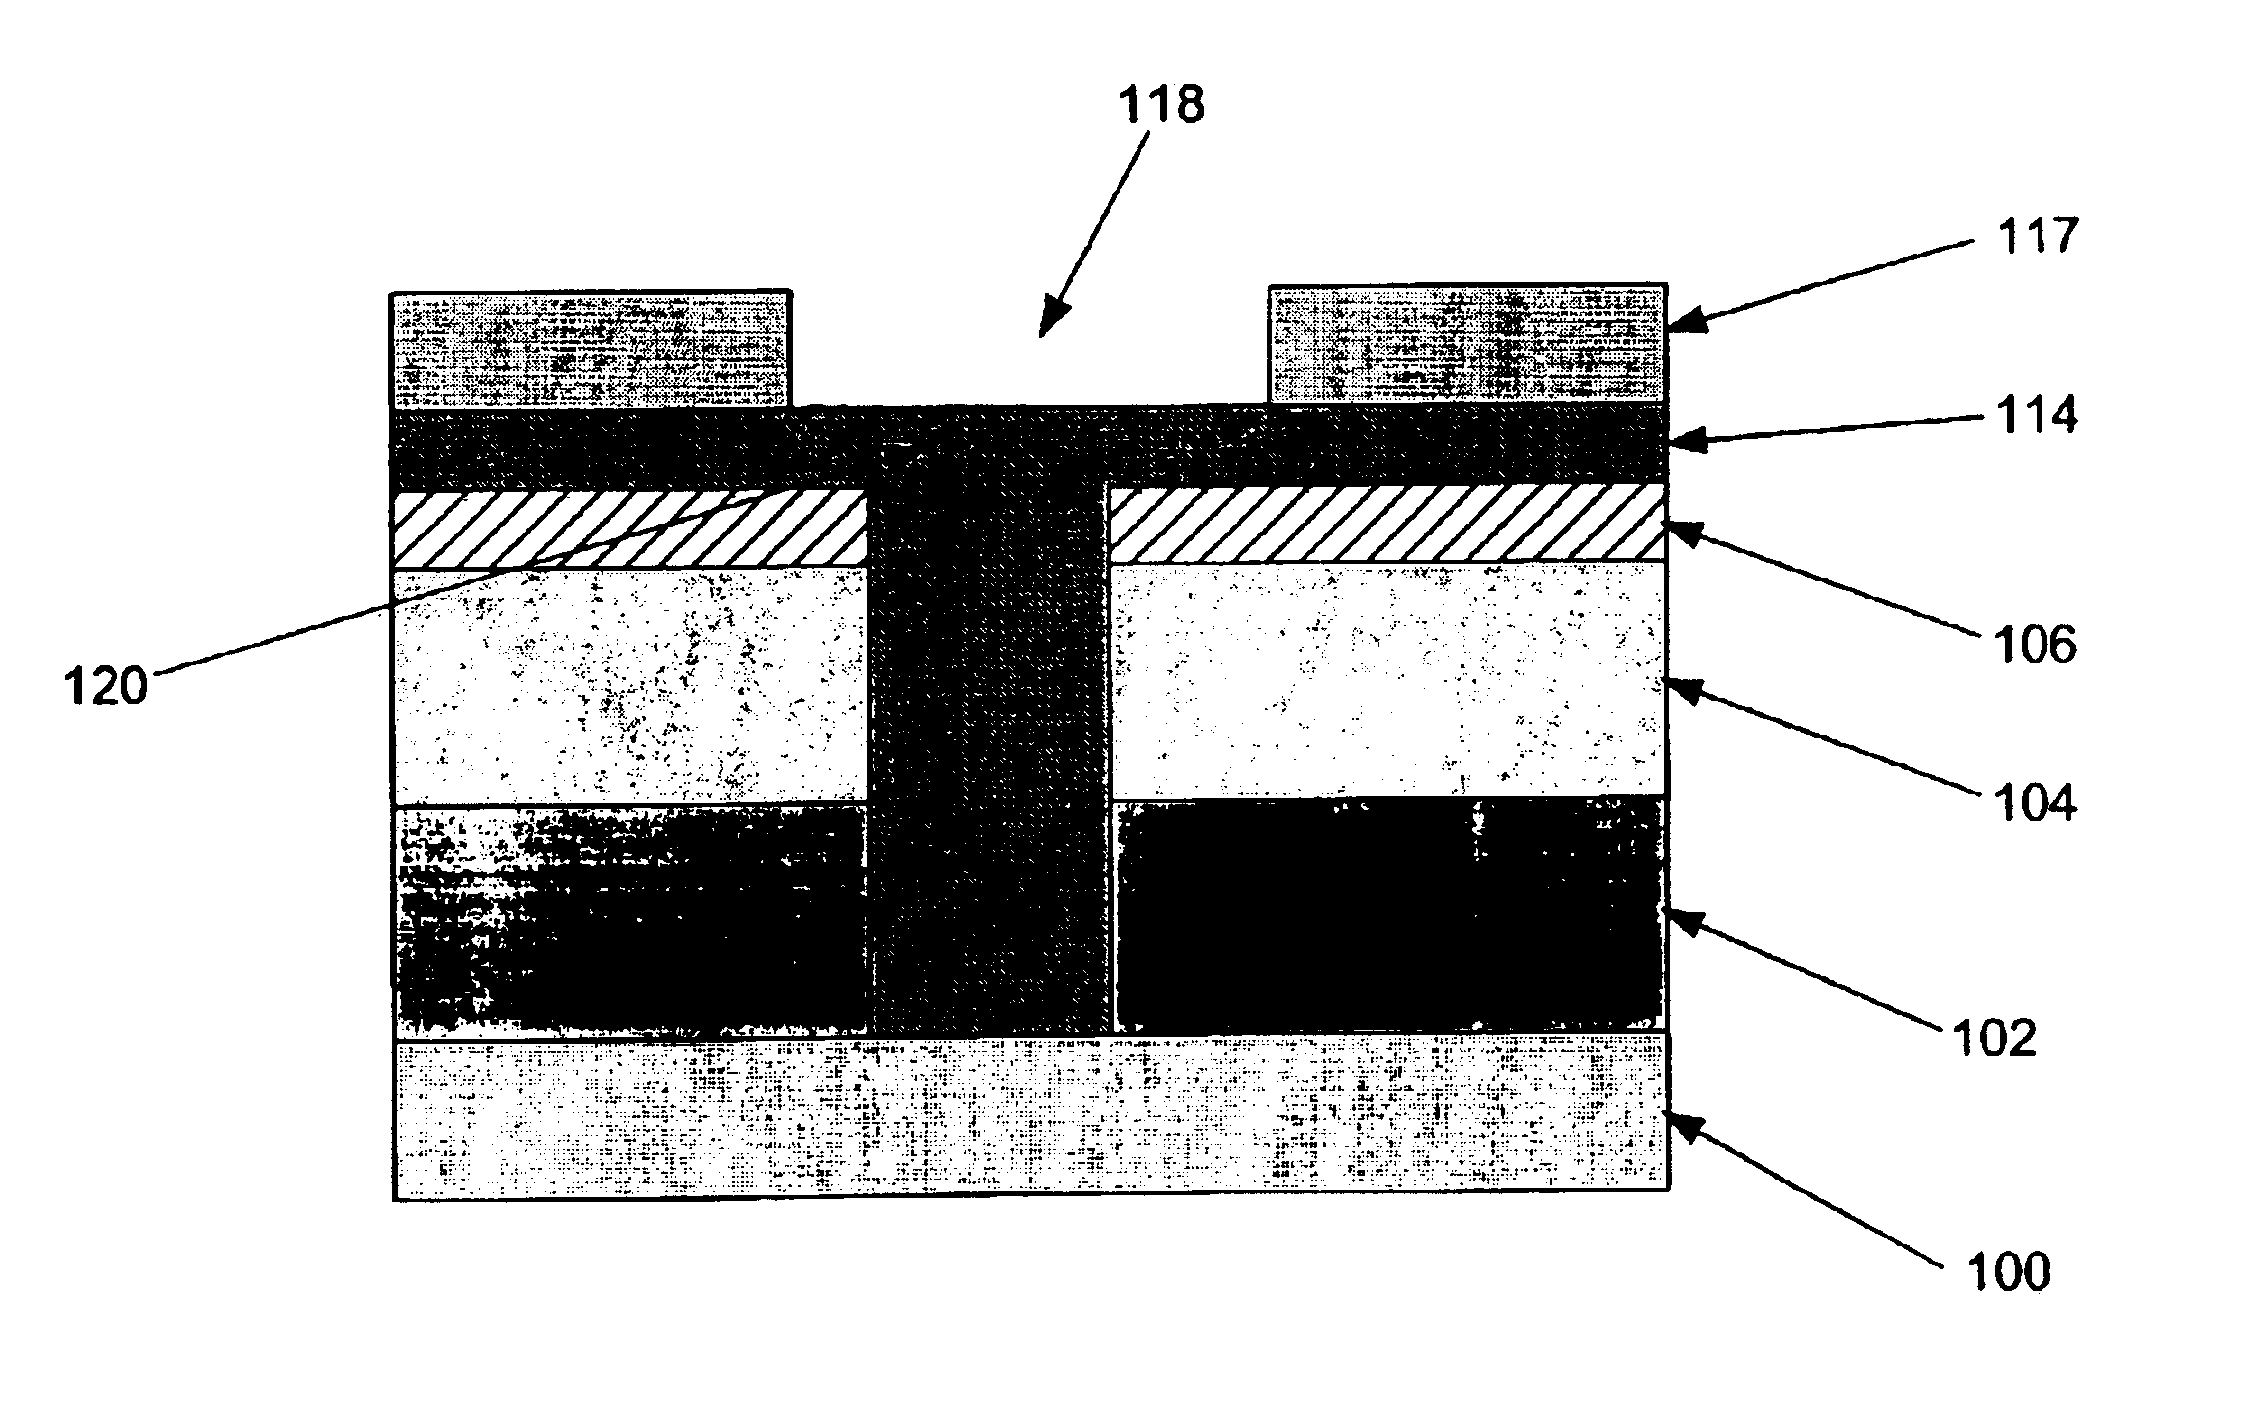 Polymer sacrificial light absorbing structure and method